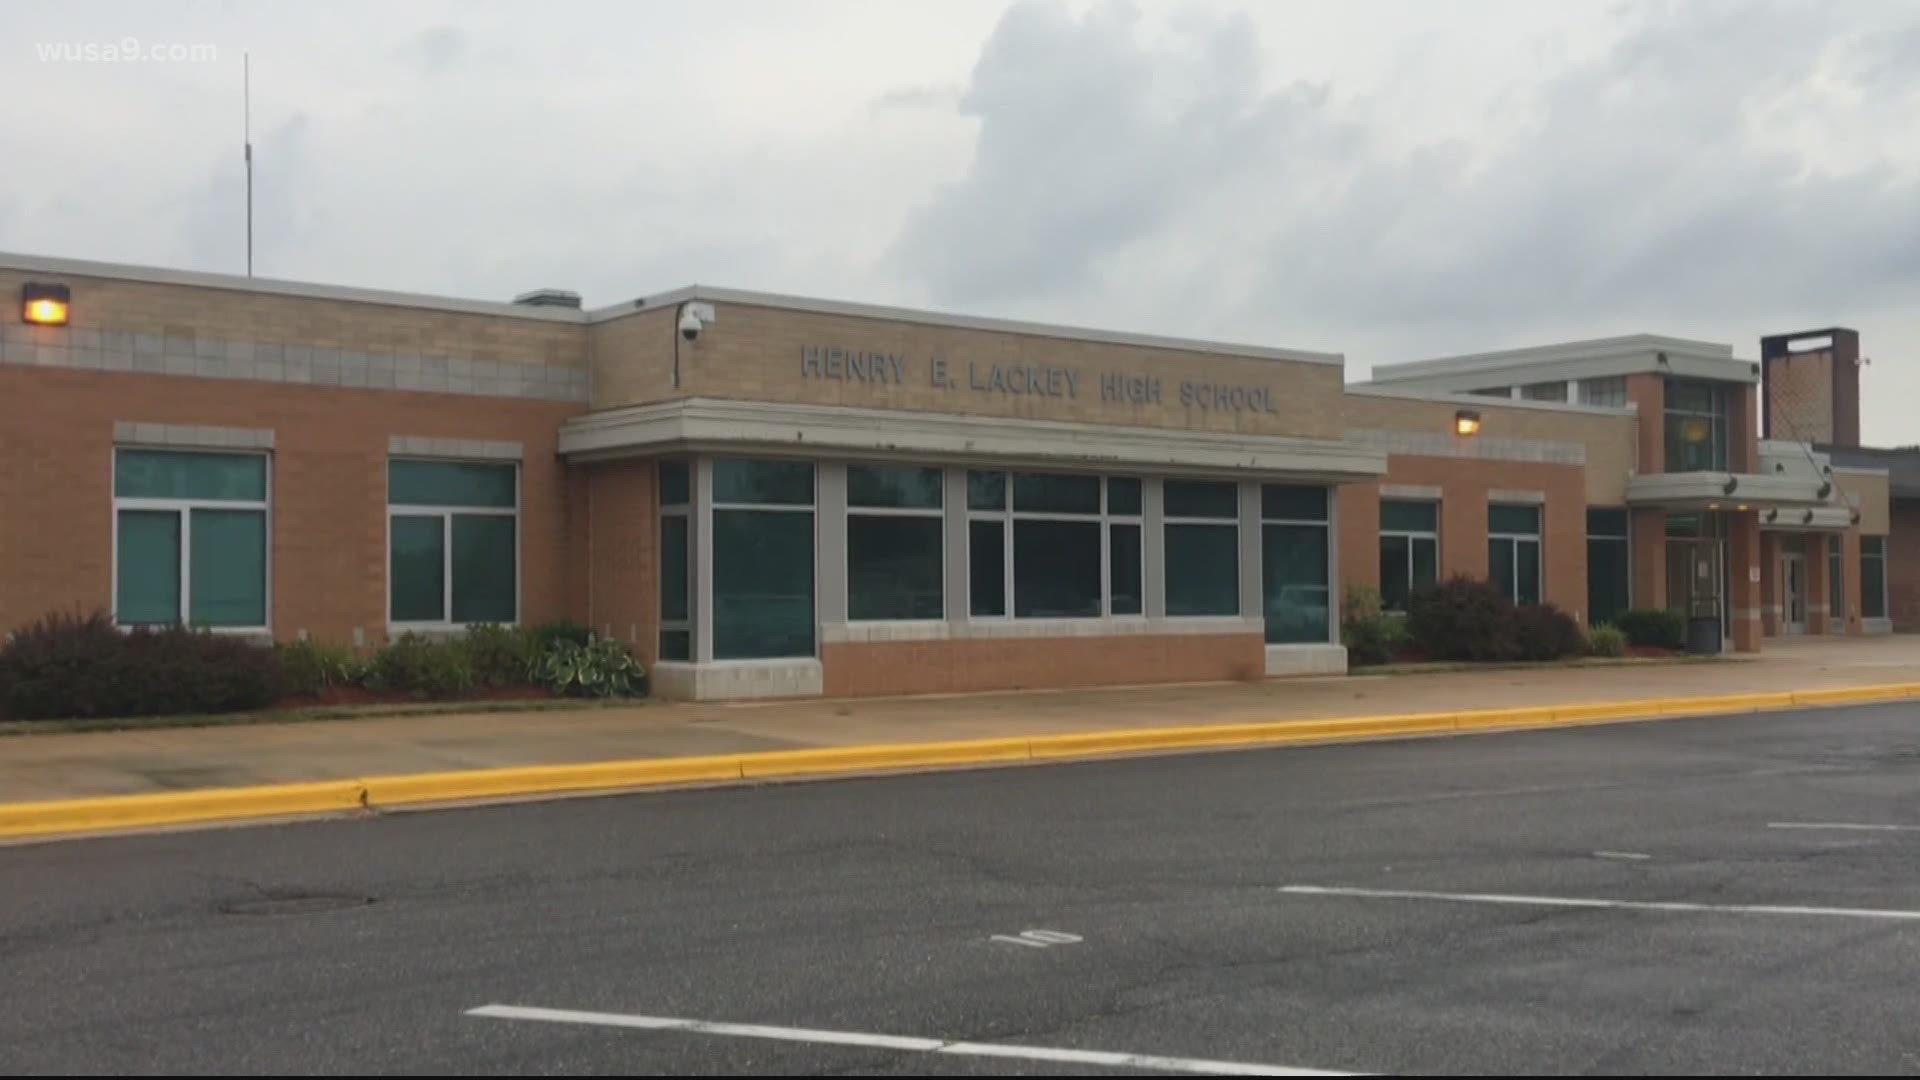 Charles County Public Schools said the assignment, handed out in a Henry E. Lackey High School English class, was 'inappropriate as a stand-alone written assignment'